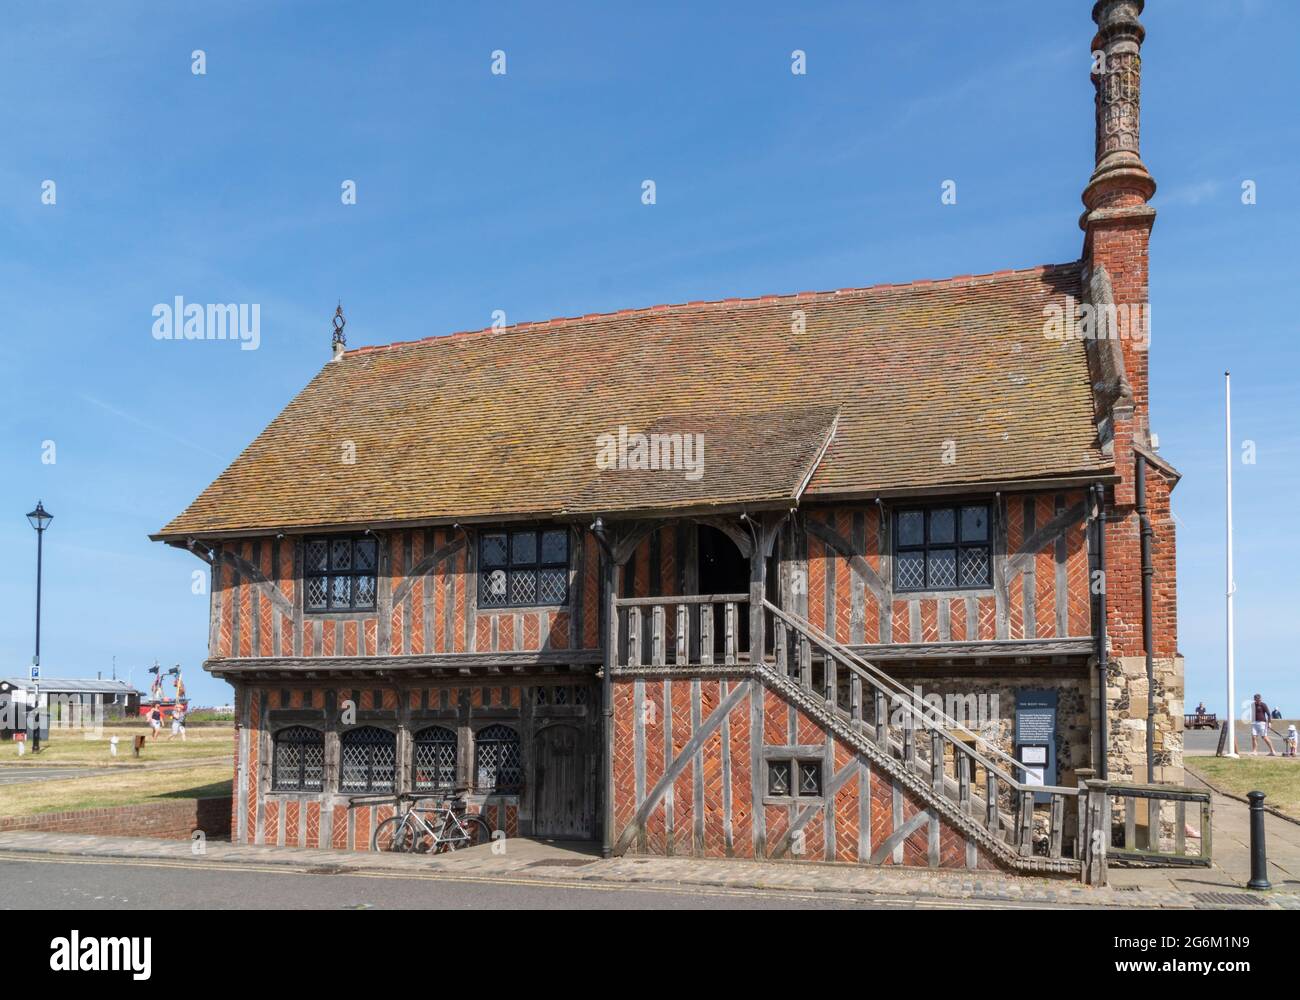 The Aldeburgh Moot Hall Stock Photo